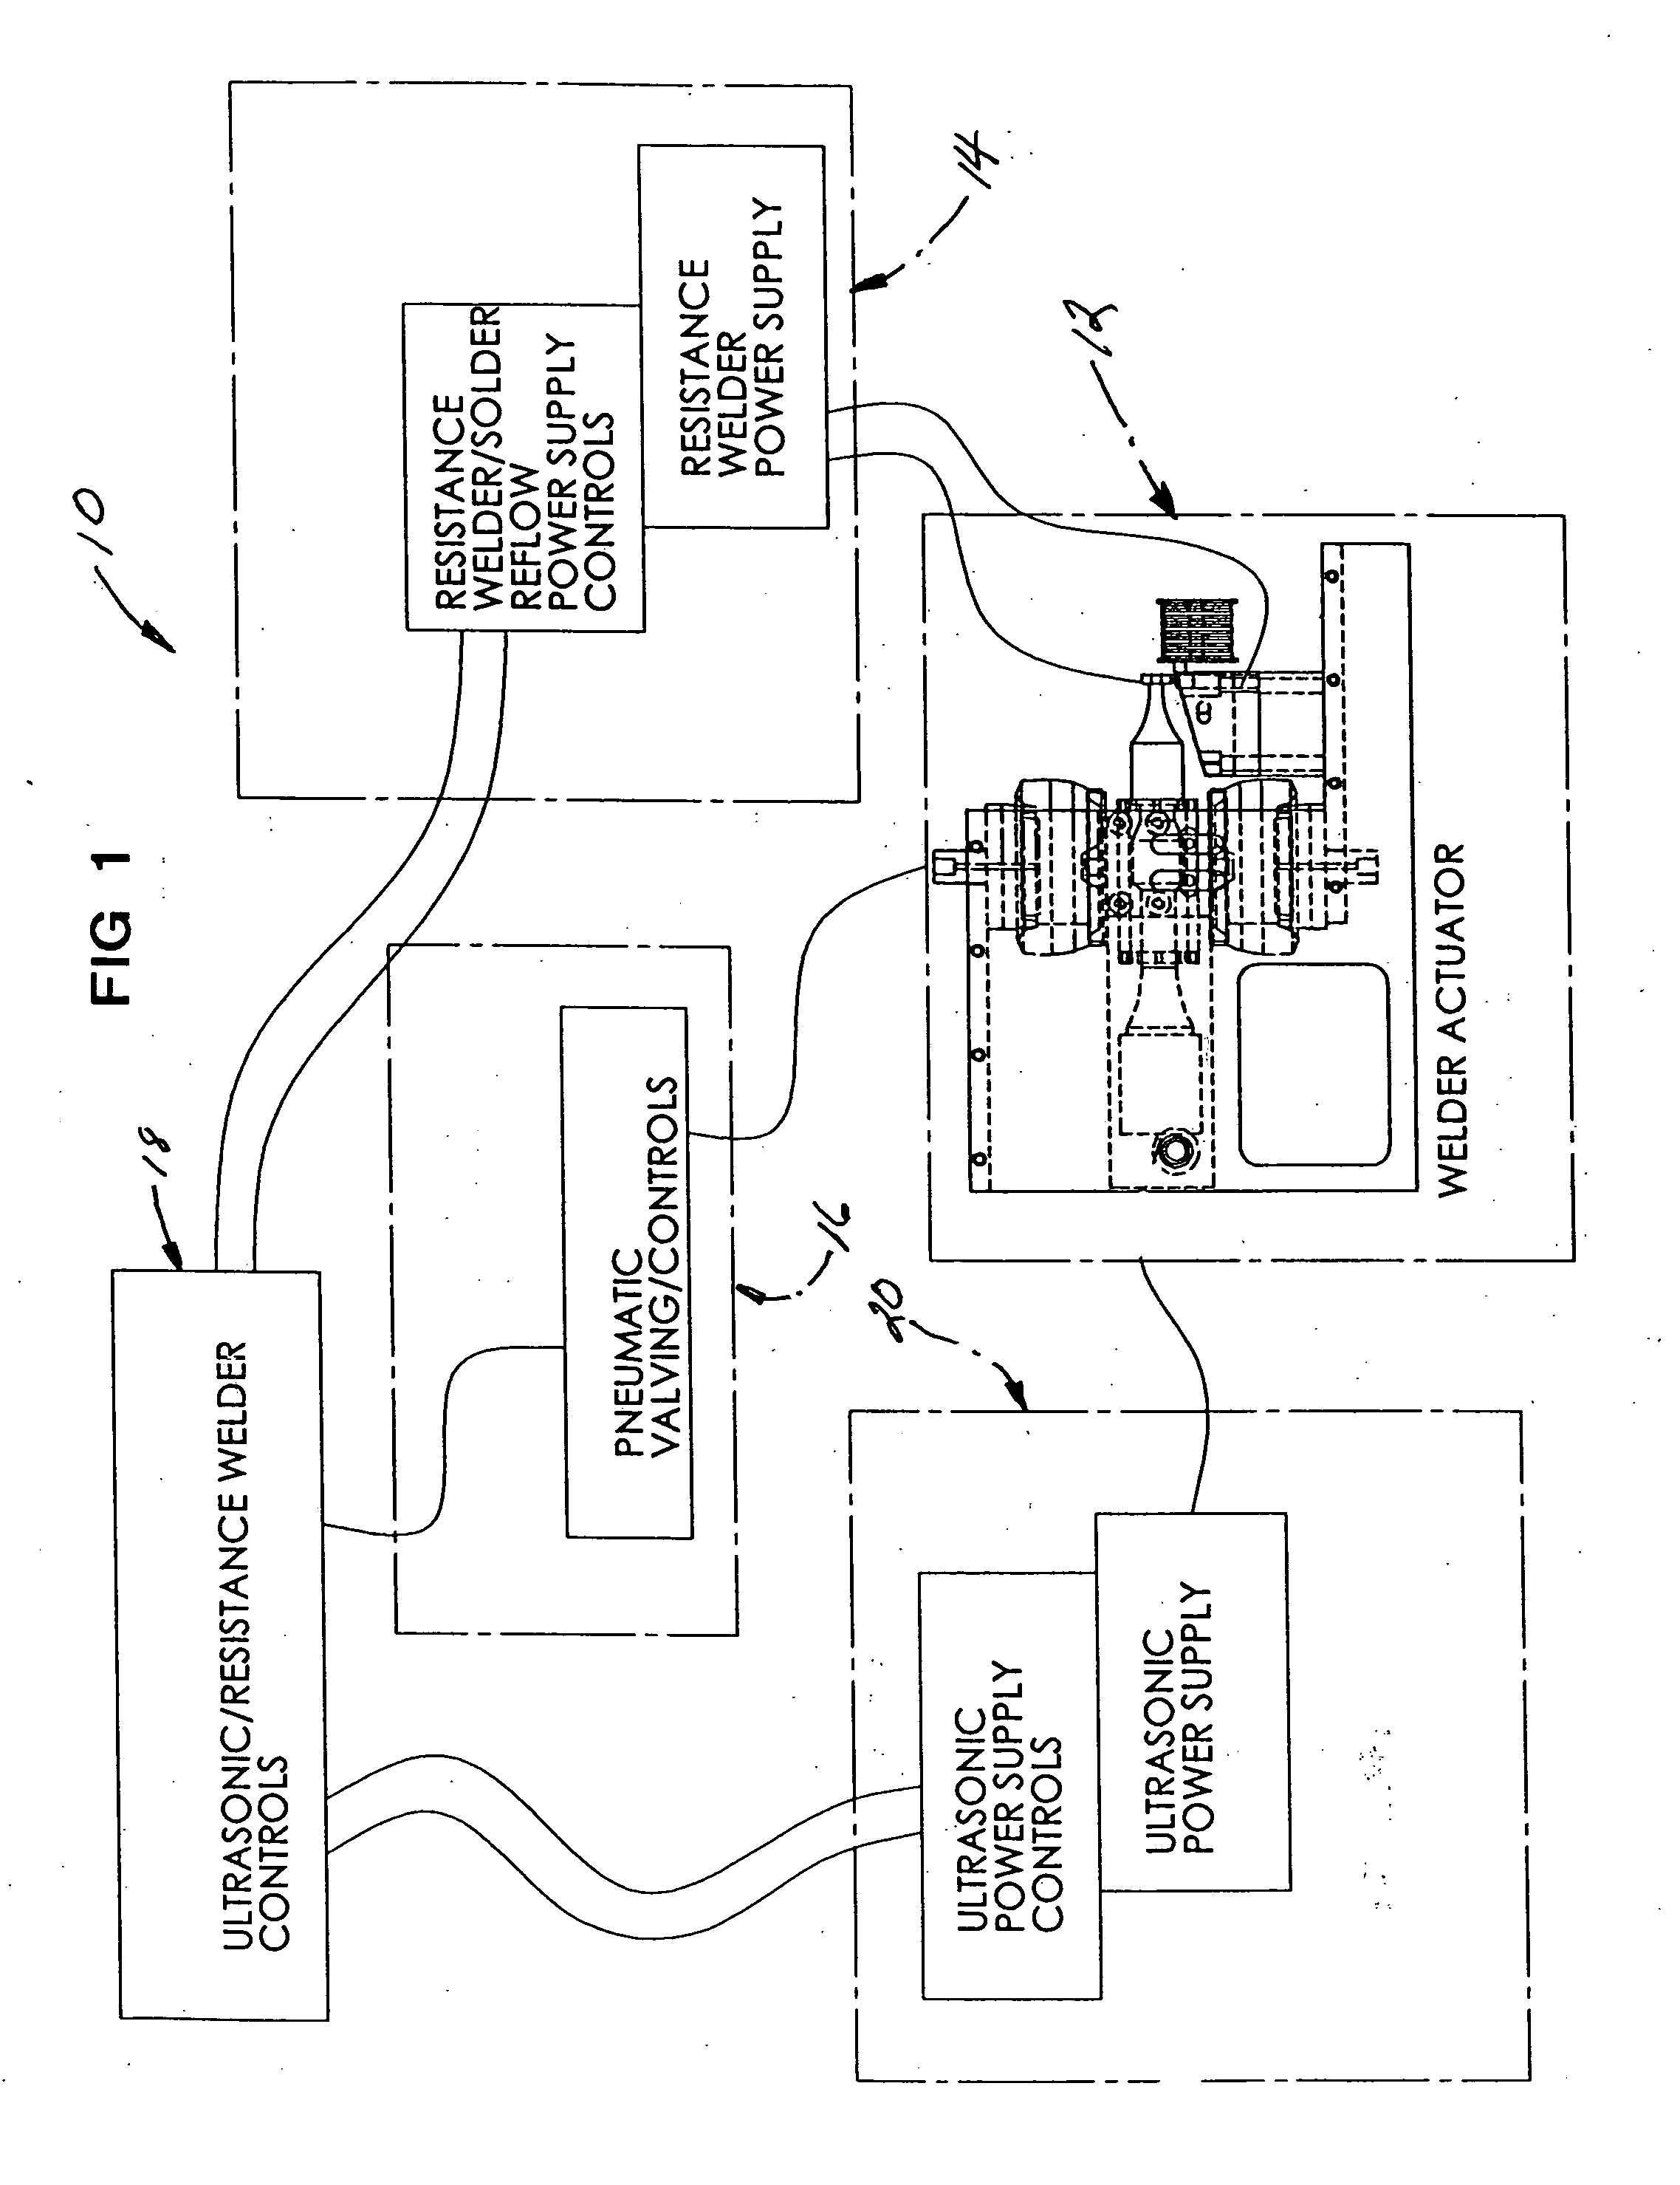 Apparatus and method for connecting coated wires